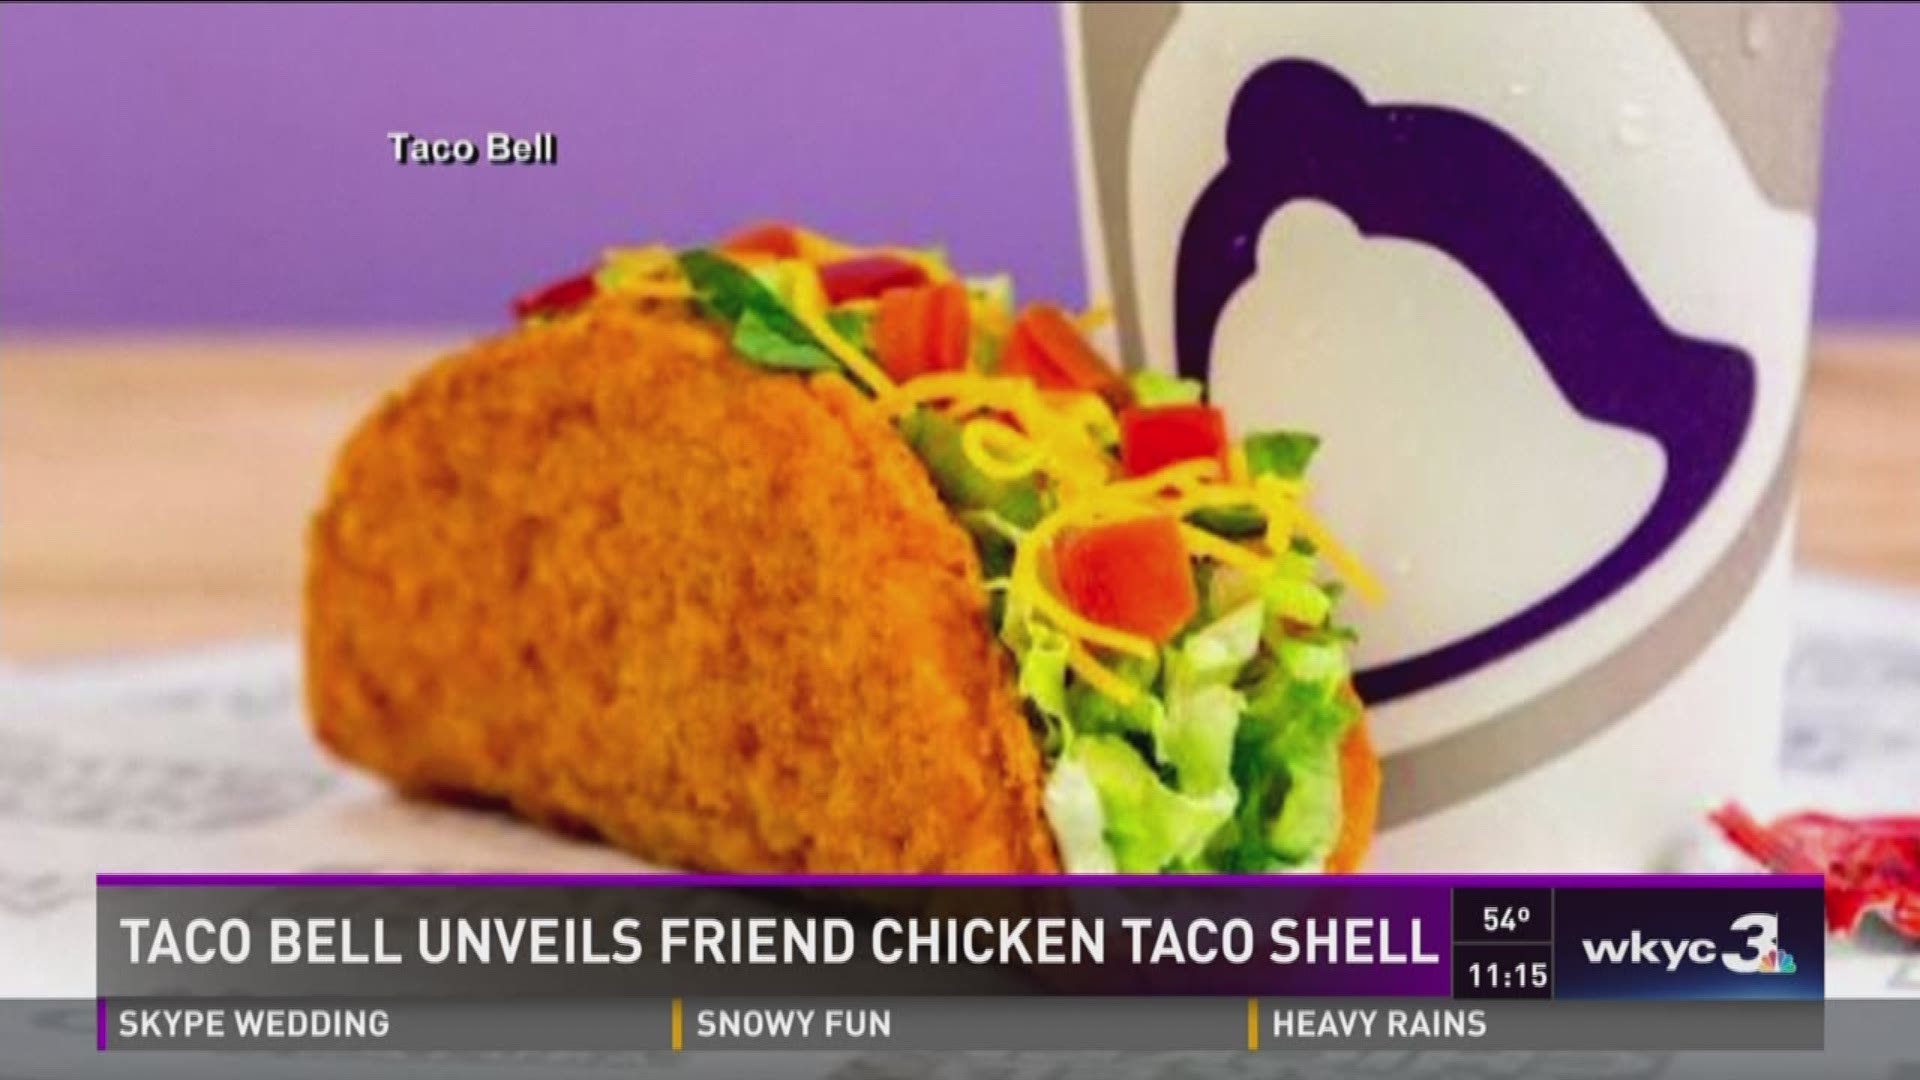 Taco Bell unveils Fried Chicken taco shell